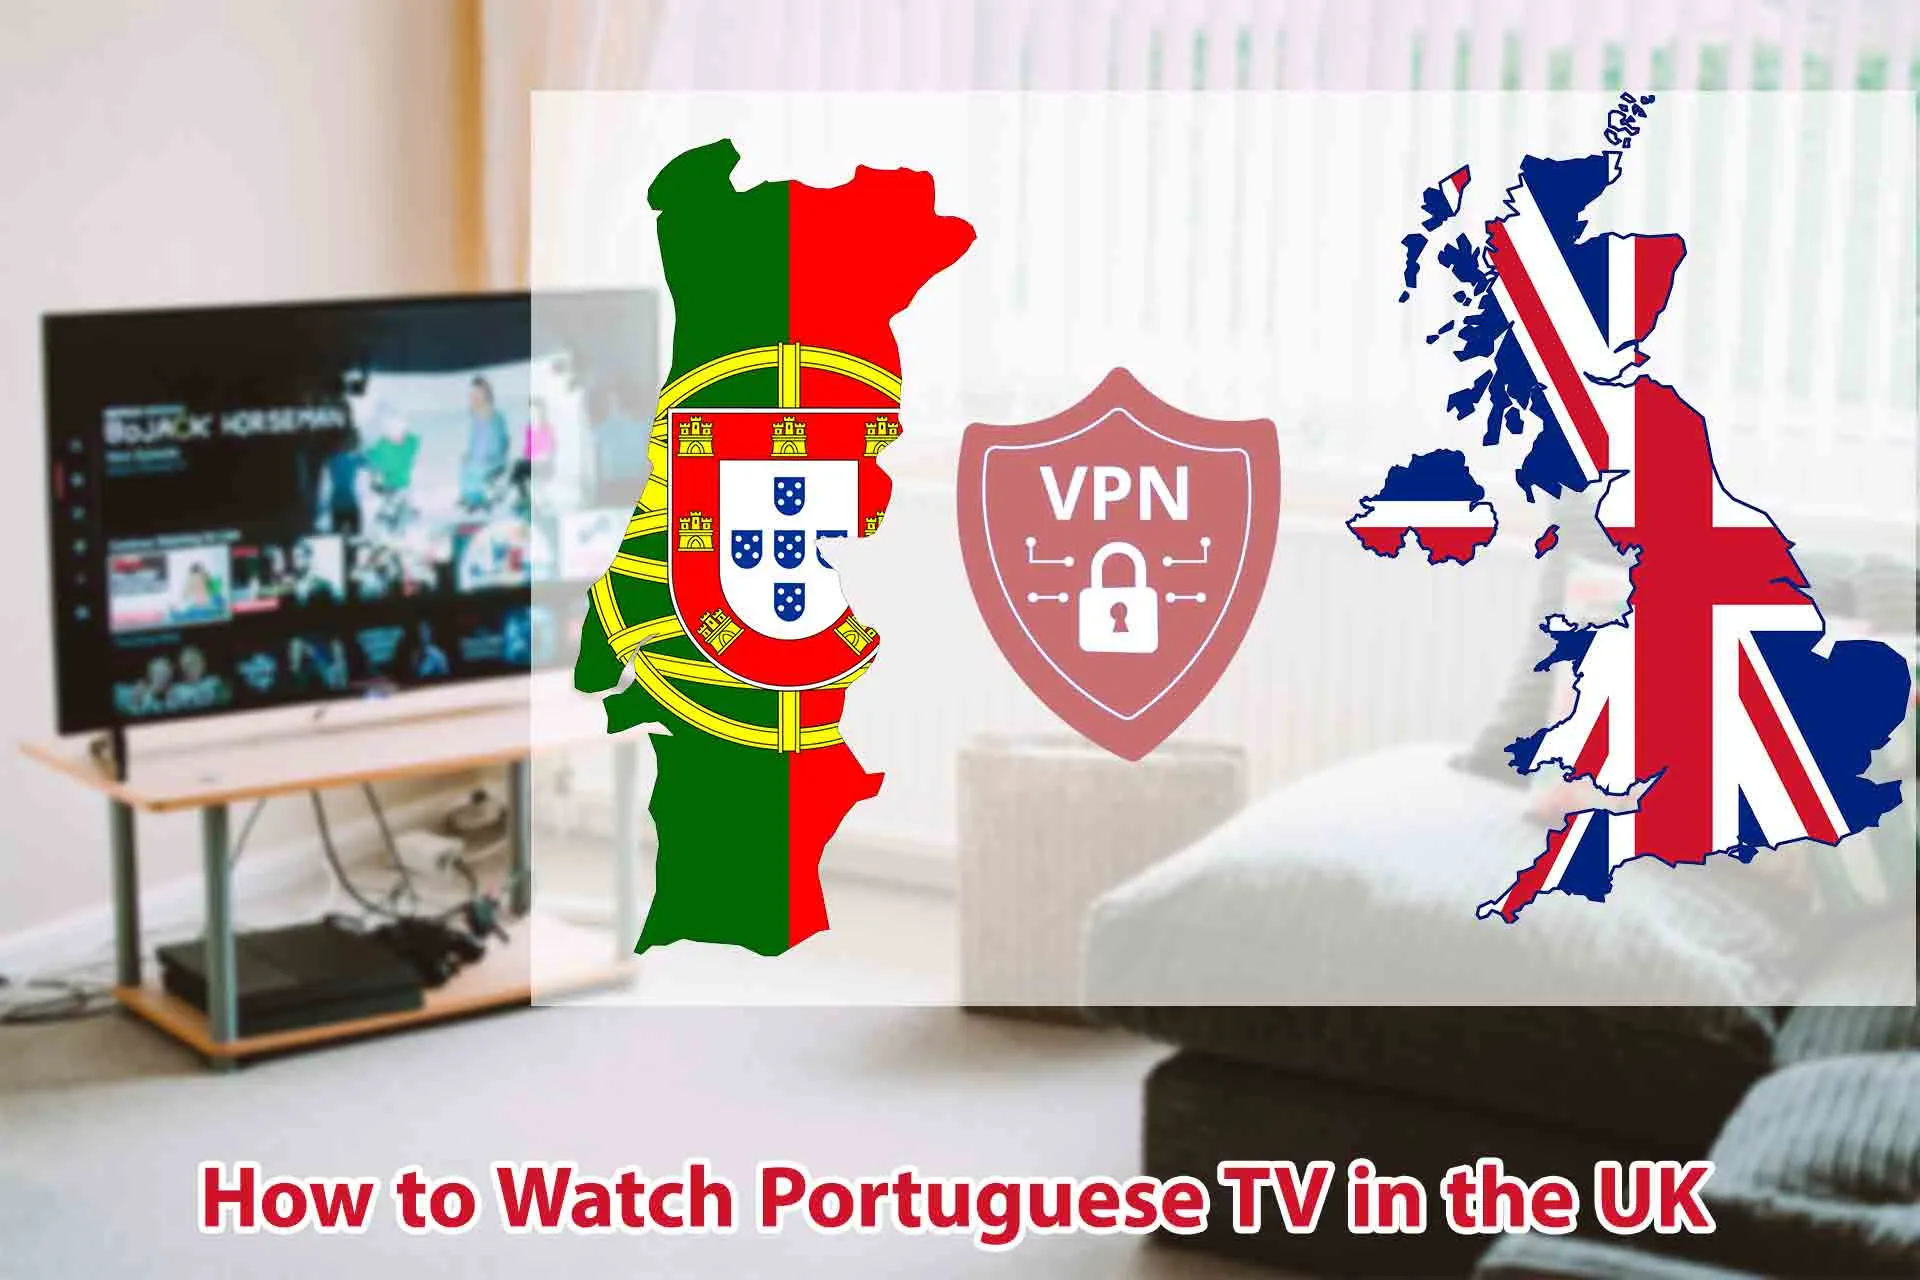 How to Watch Portuguese TV in the UK